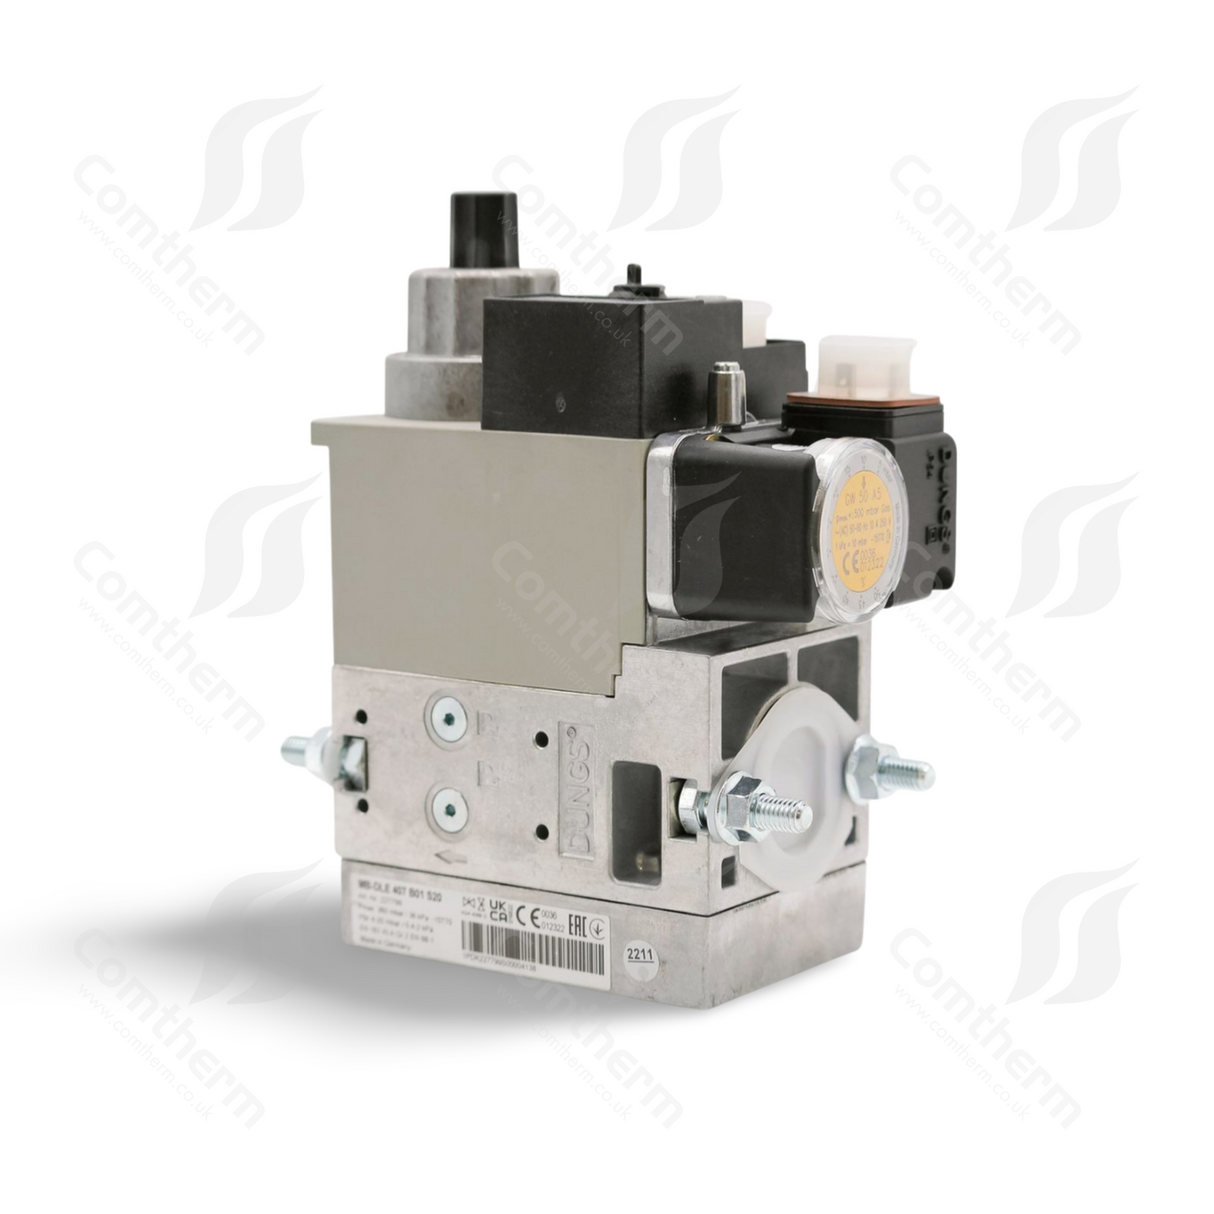 Dungs MB-DLE 407 B01 S52 + GW150A5 Multibloc Gas Valve - 110v